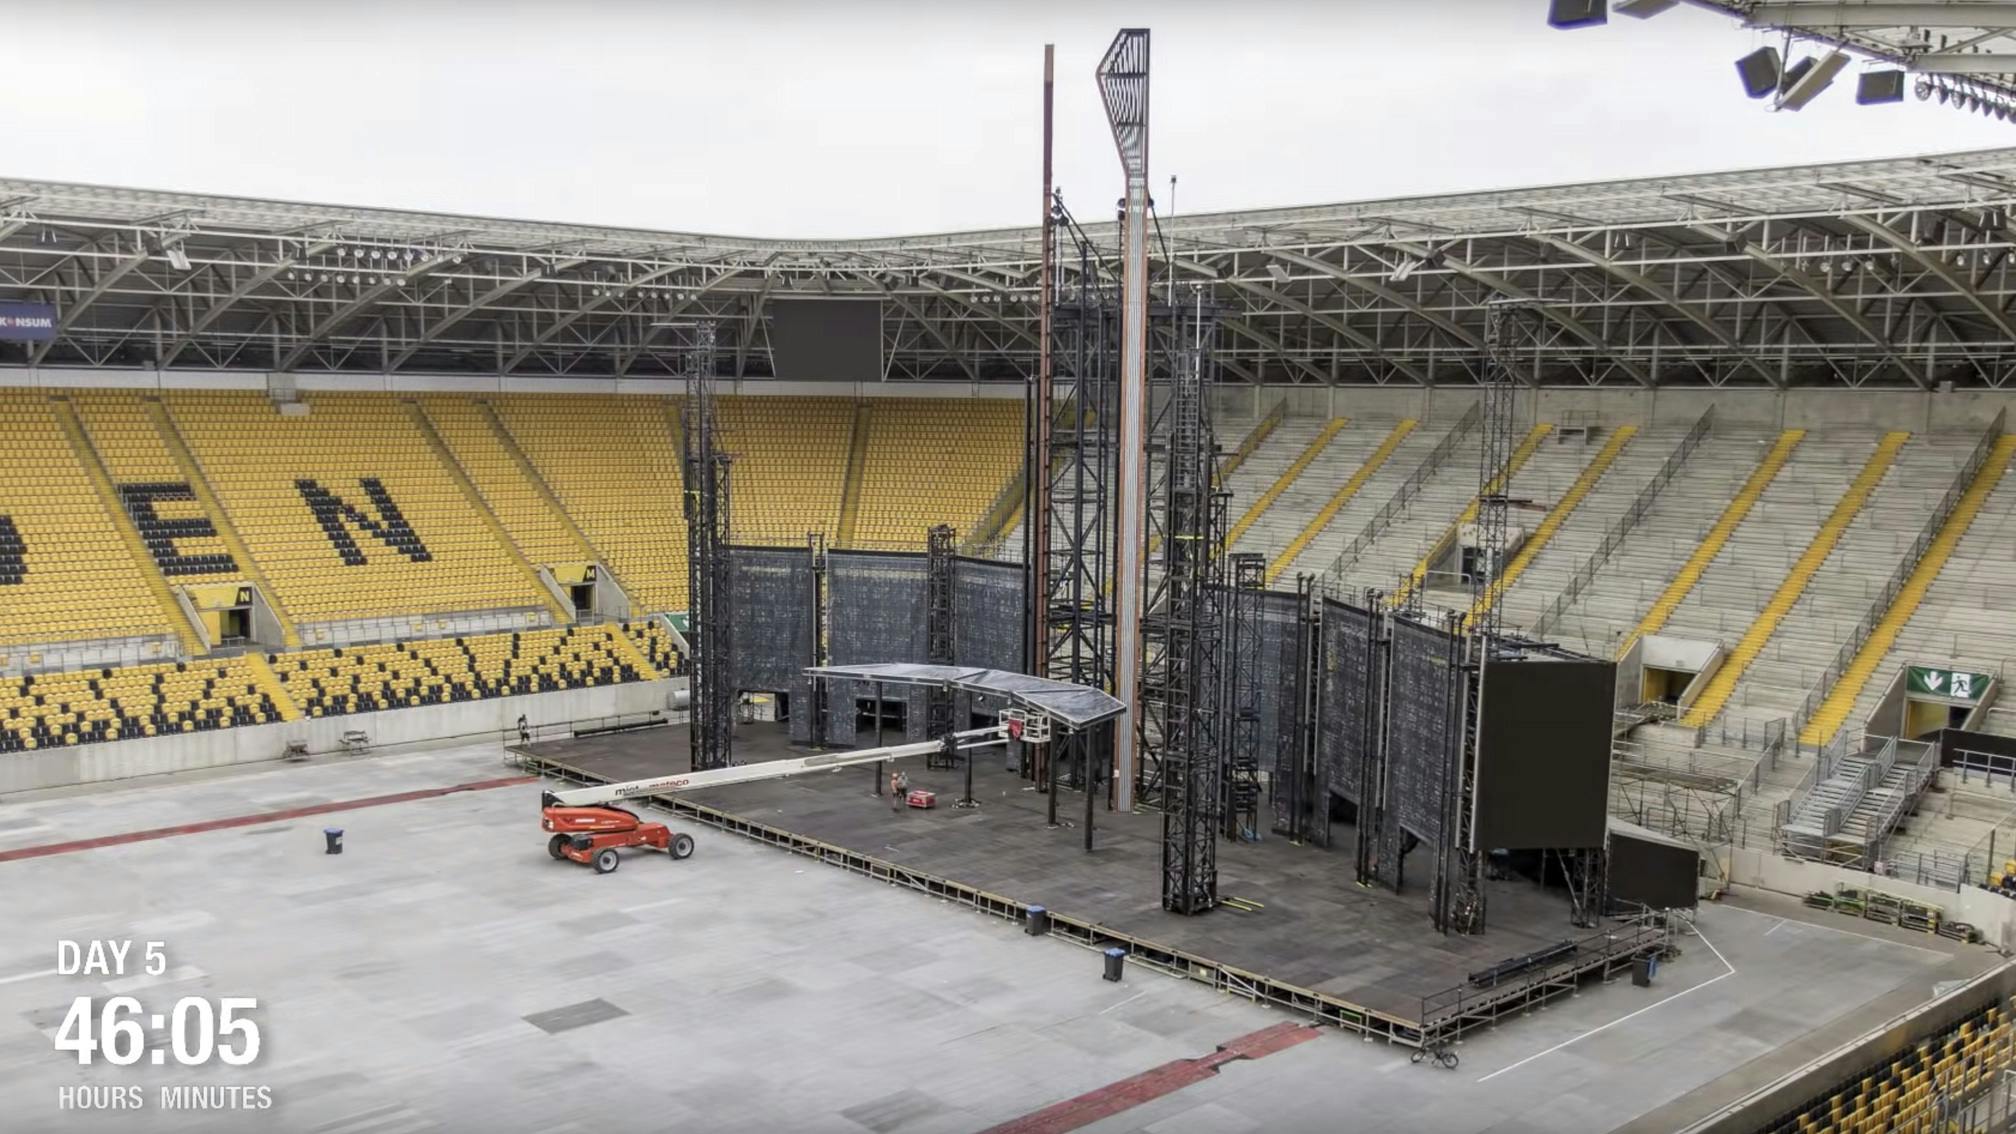 This Time-Lapse Video Of Rammstein's Stage Being Built Is Absolutely Epic